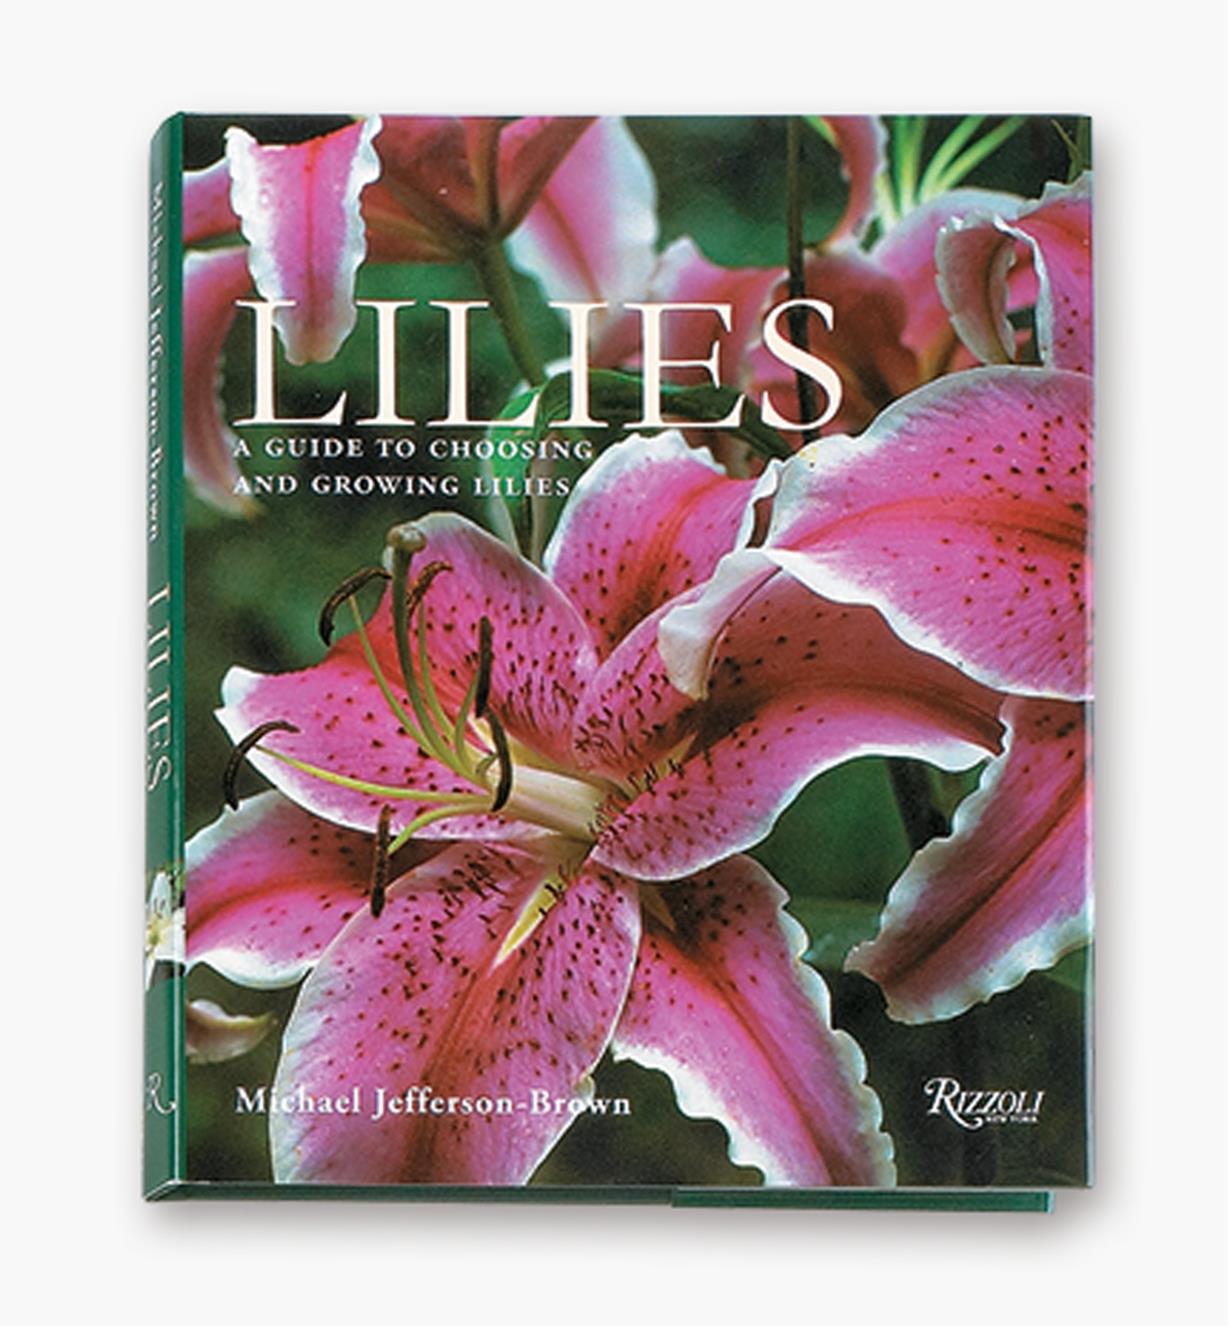 Lilies – A Guide to Choosing and Growing Lilies